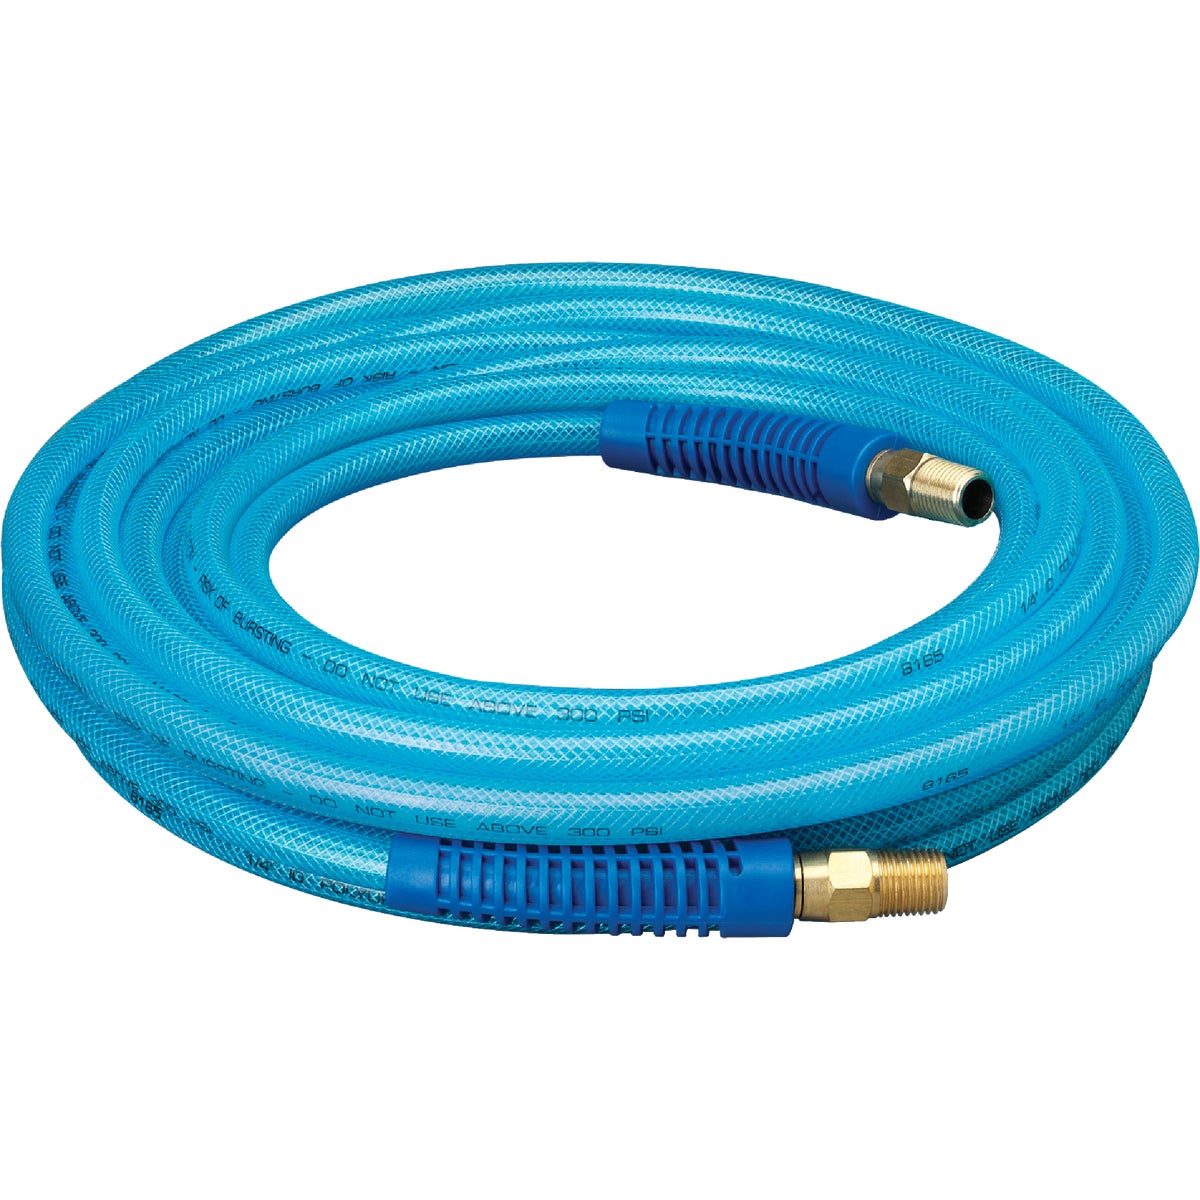 Item 570018, The light weight of polyurethane hose makes it ideal for applications where